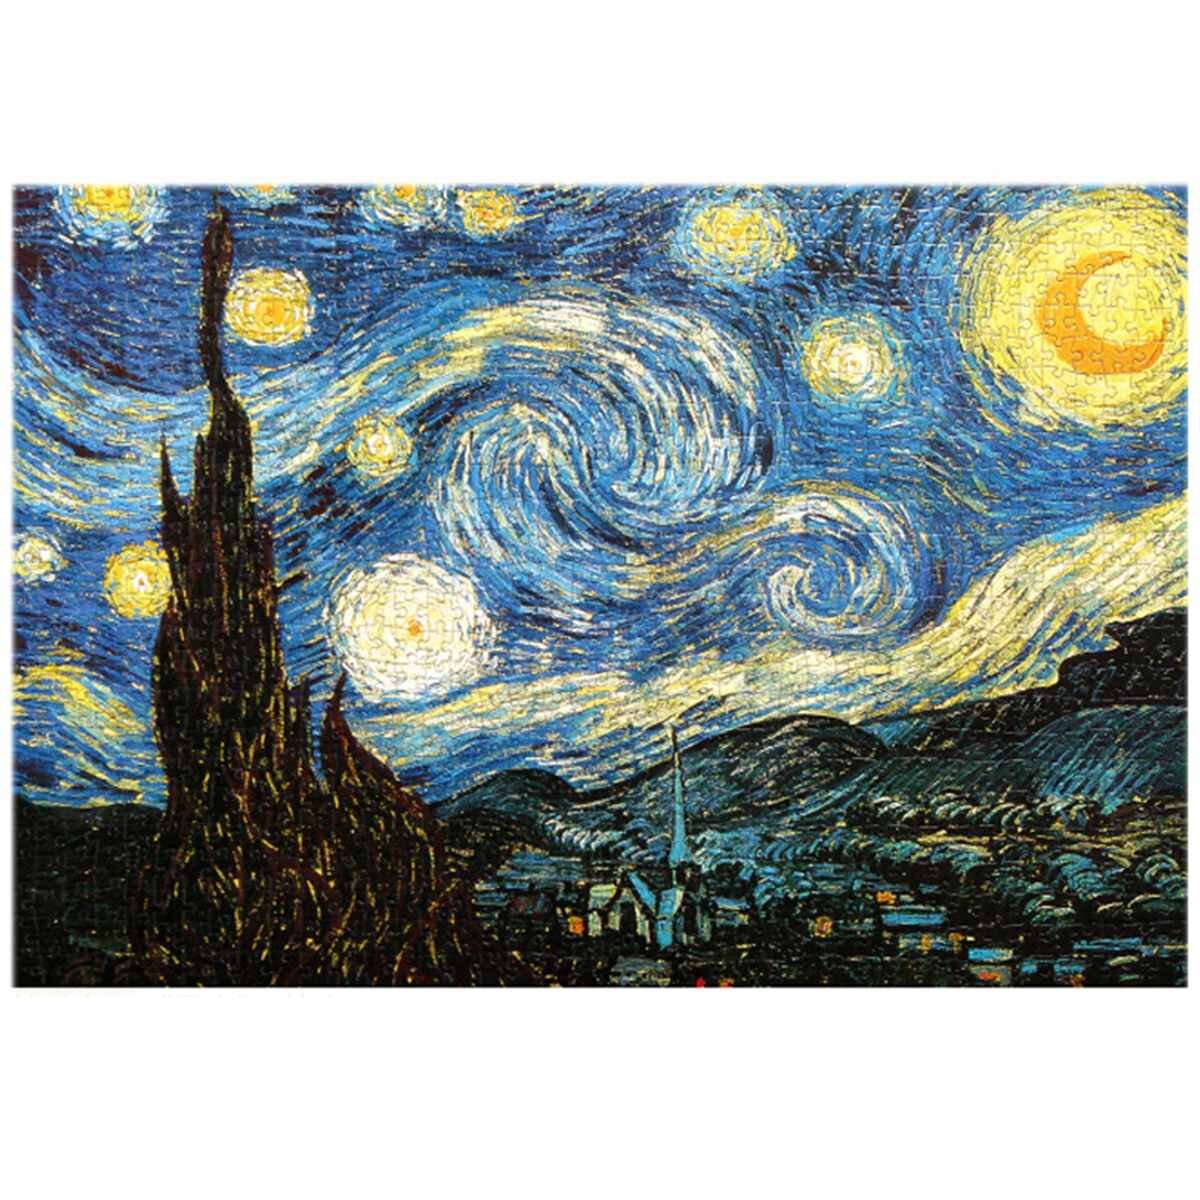 1000 Pieces Nuit Etoilee DIY Assembly Jigsaw Puzzles Landscape Picture Educational Games Toy for Adults Children Pretty